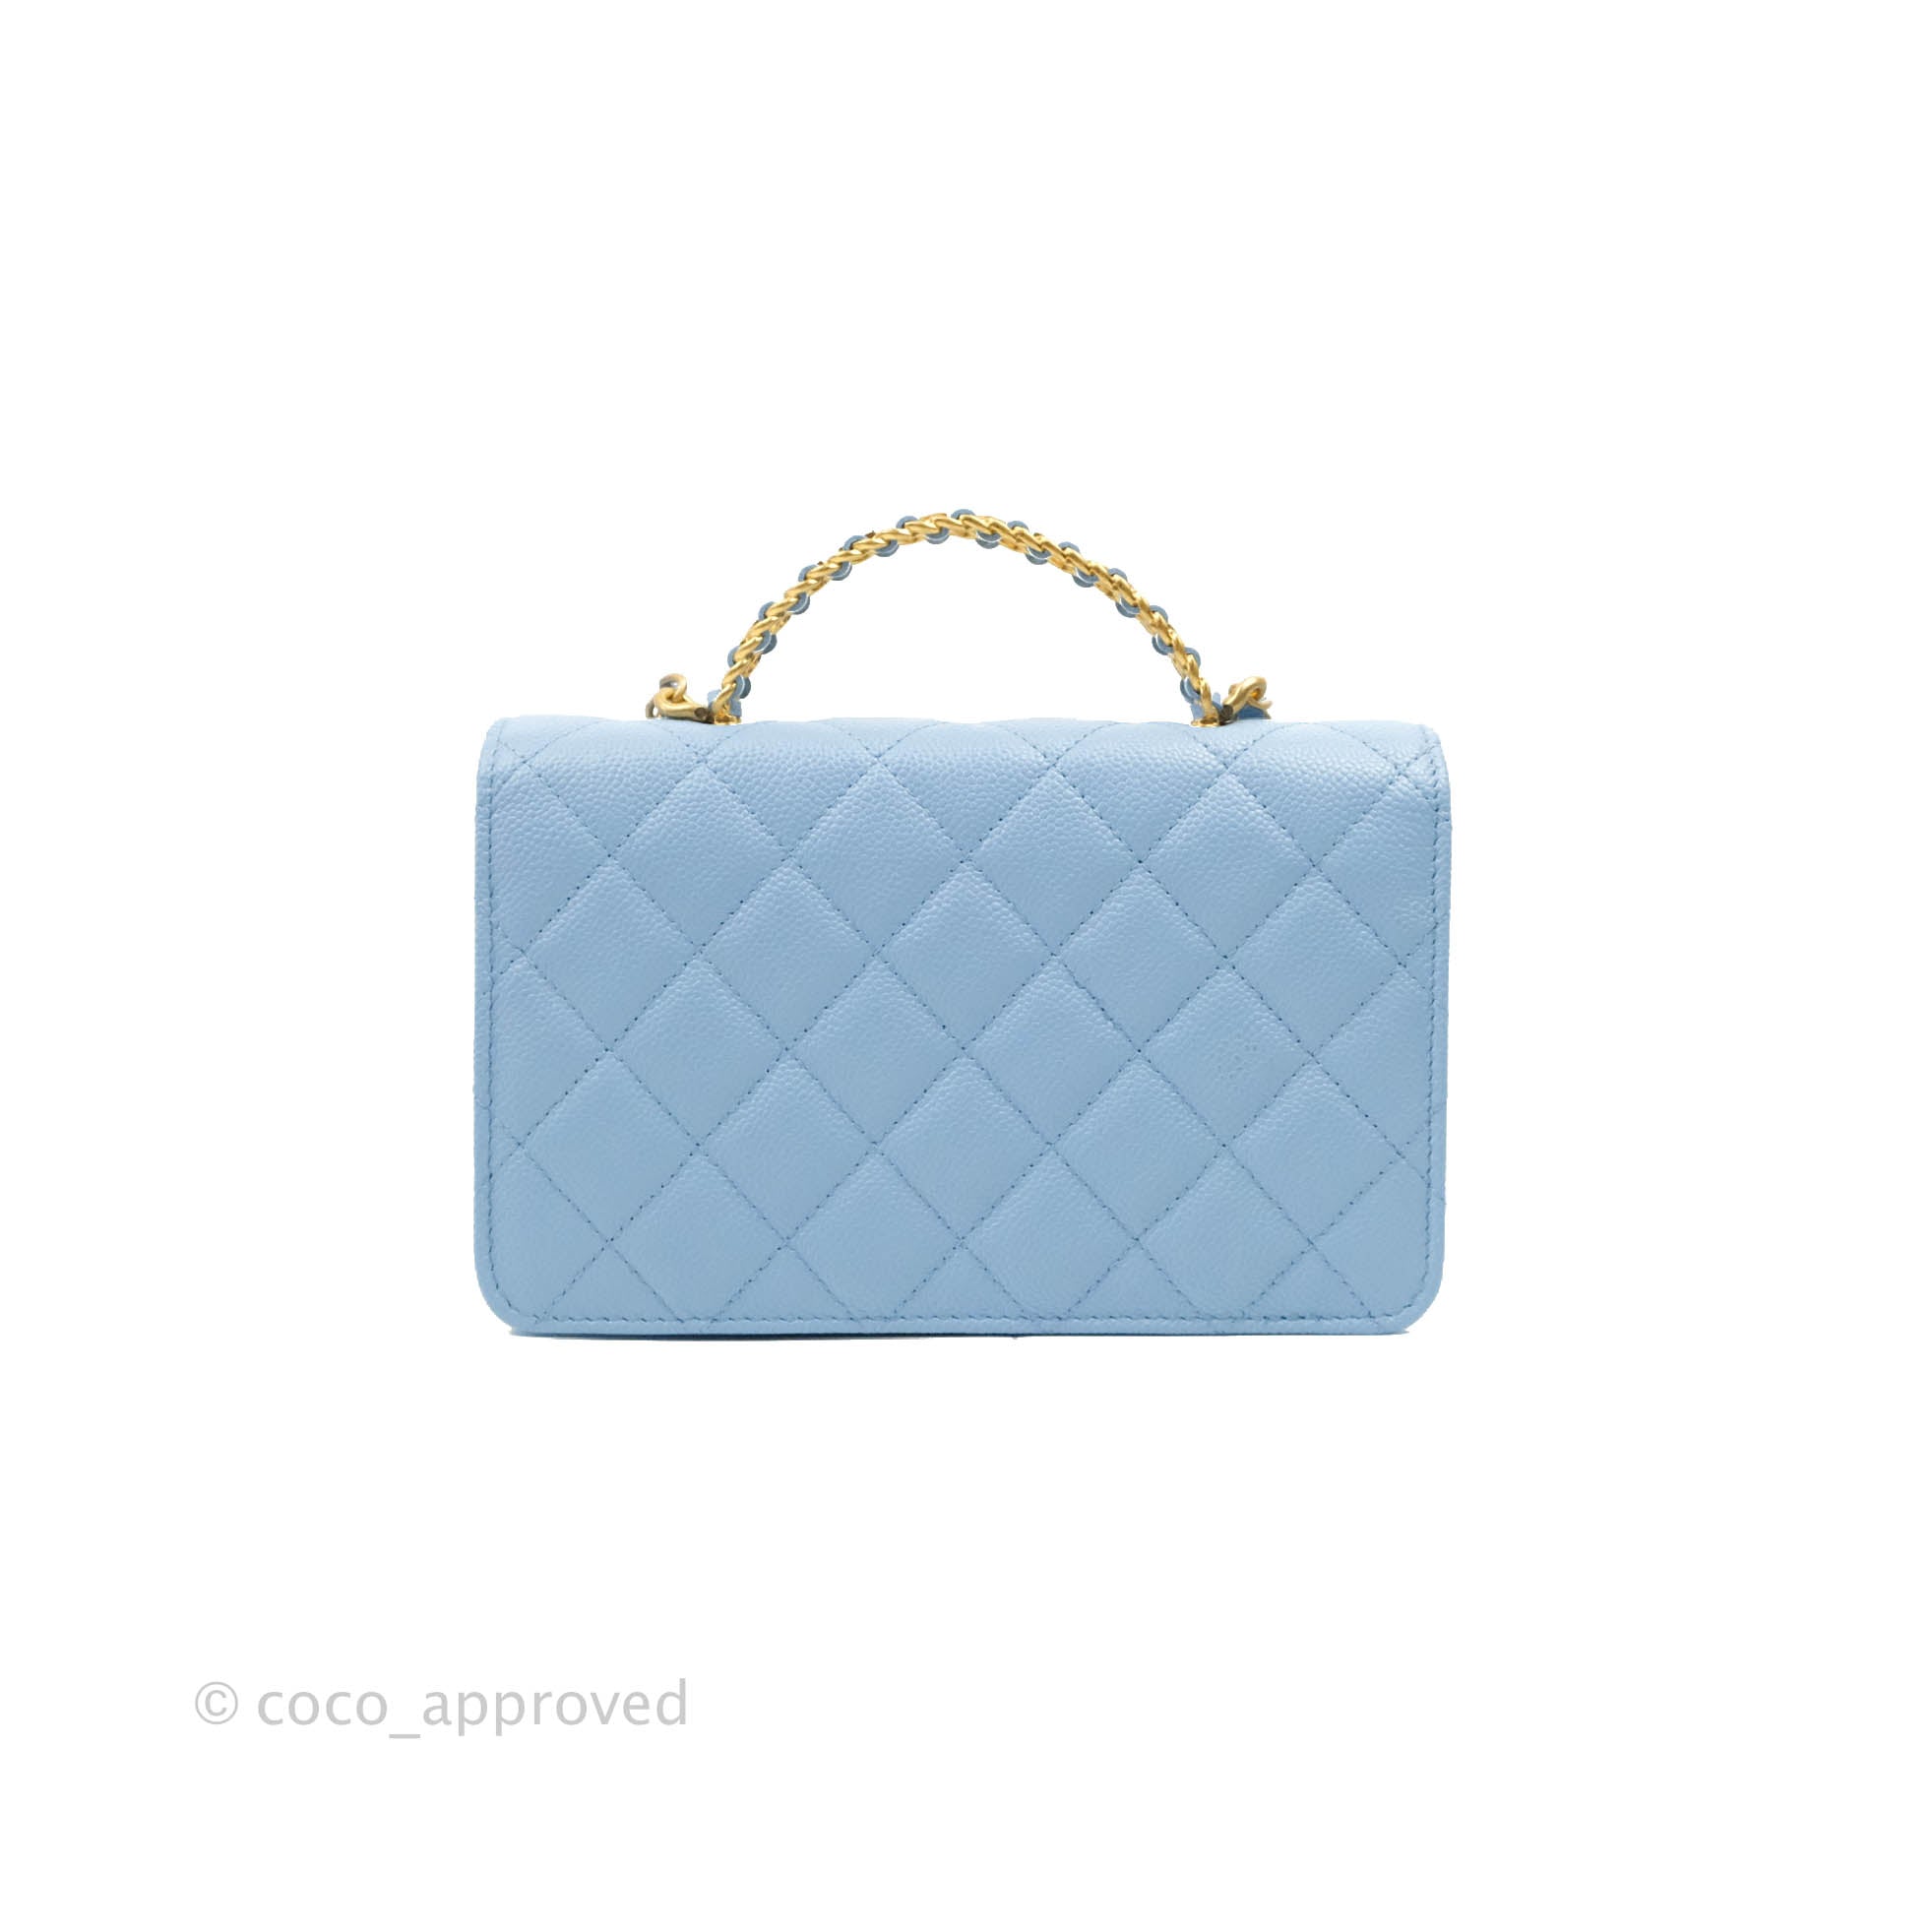 Chanel Vanity Rectangular with Top Handle Pick Me Up Blue Caviar